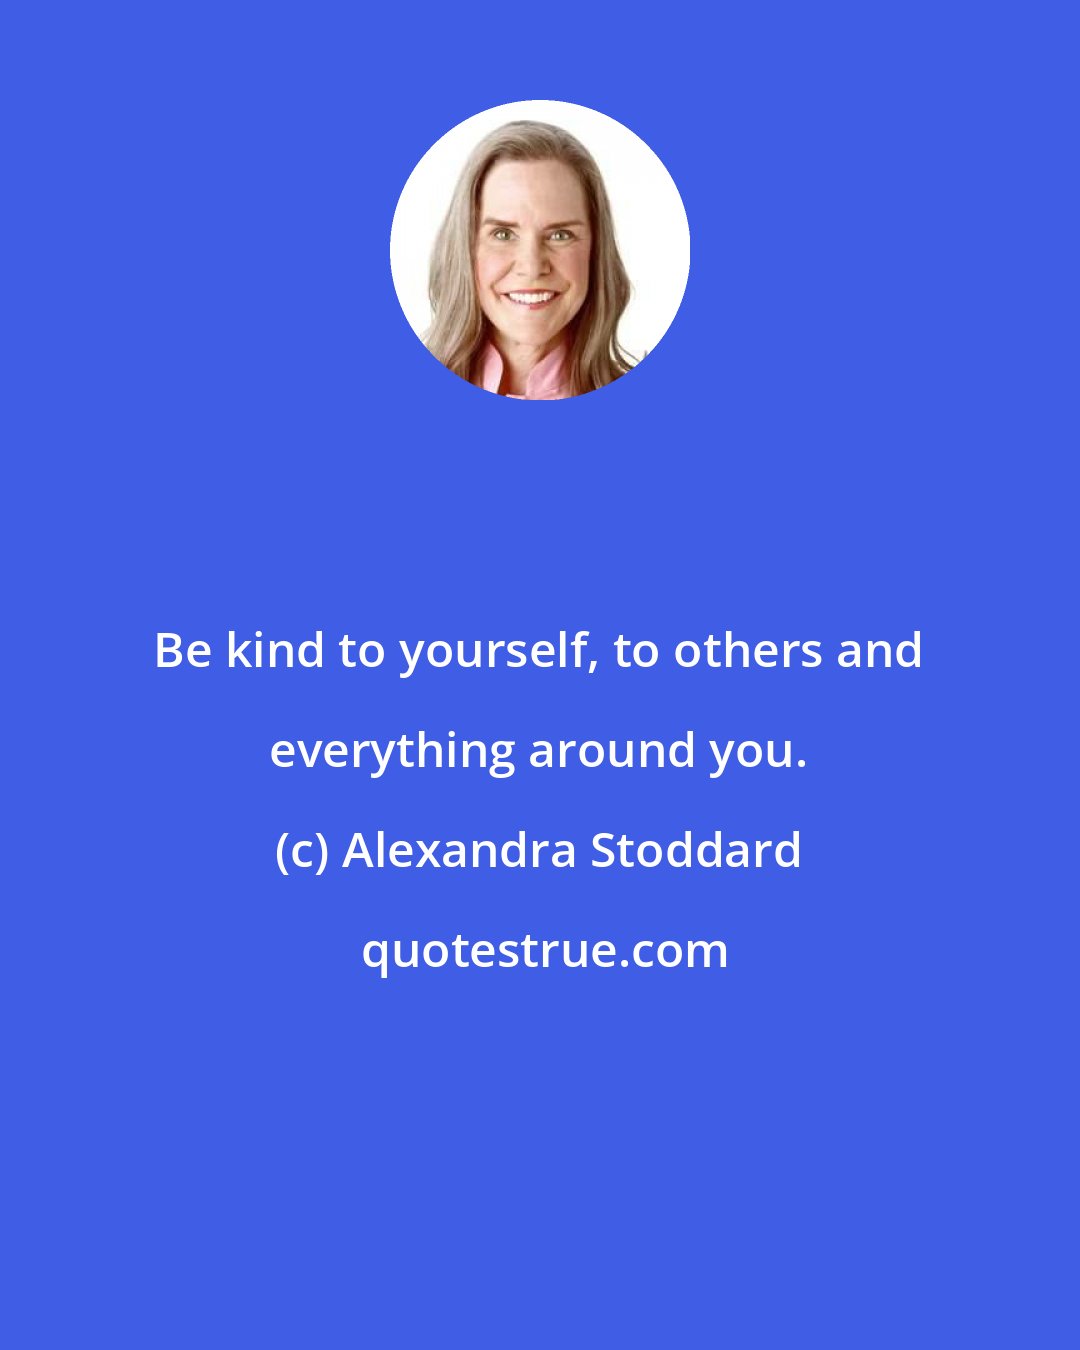 Alexandra Stoddard: Be kind to yourself, to others and everything around you.